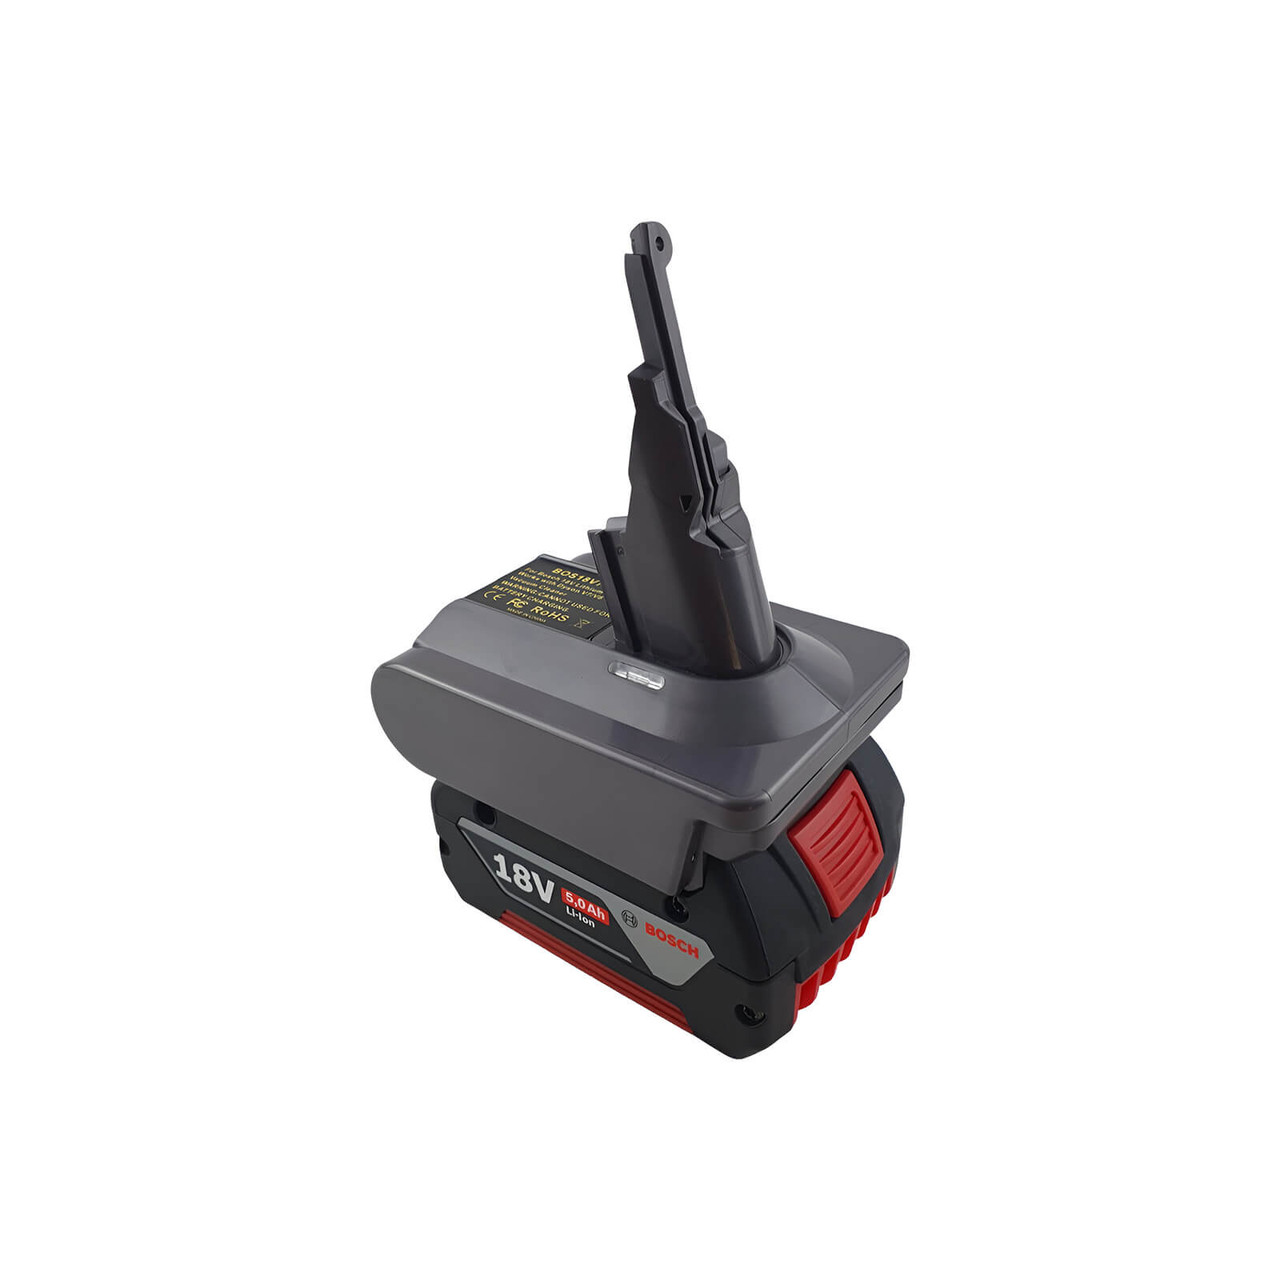 Bosch Battery Adapter to Dyson V7 – Power Tools Adapters